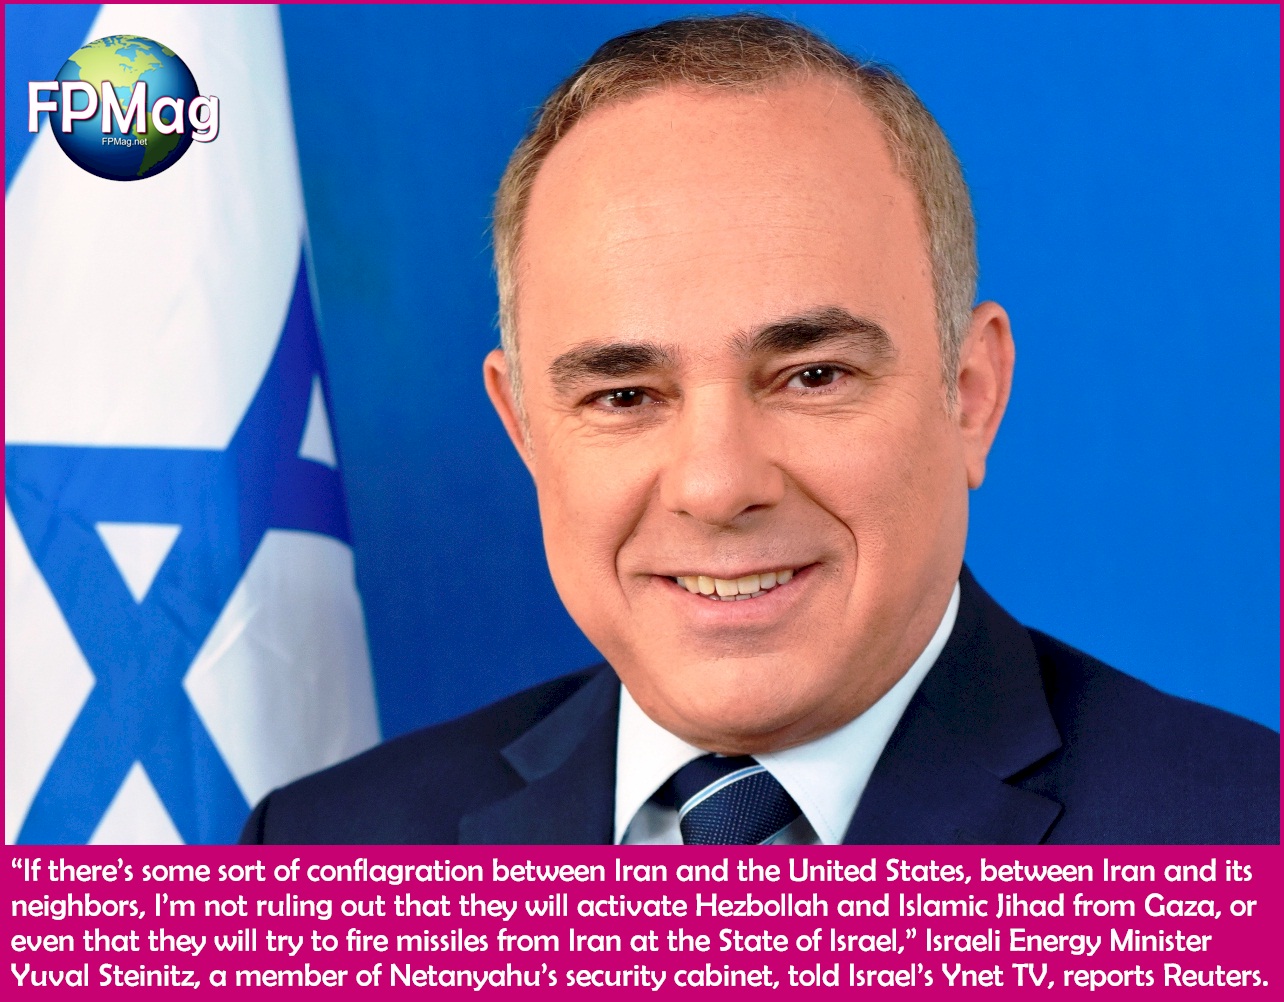 “If there’s some sort of conflagration between Iran and the United States, between Iran and its neighbors, I’m not ruling out that they will activate Hezbollah and Islamic Jihad from Gaza, or even that they will try to fire missiles from Iran at the State of Israel,” Israeli Energy Minister Yuval Steinitz, a member of Netanyahu’s security cabinet, told Israel’s Ynet TV, reports Reuters.